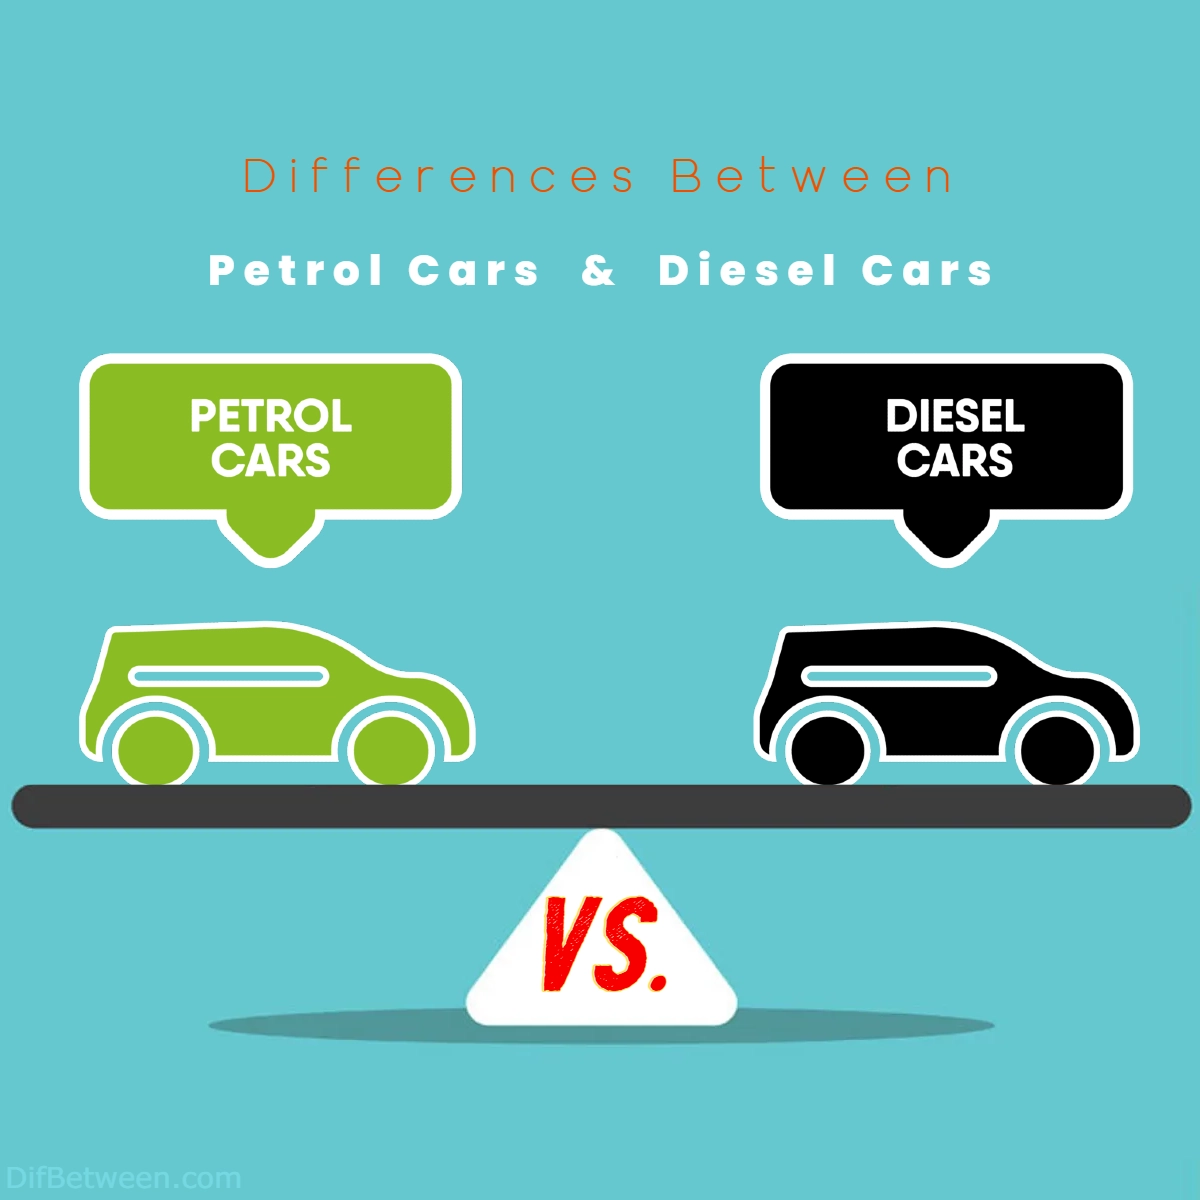 Difference Between Petrol Cars and Diesel Cars